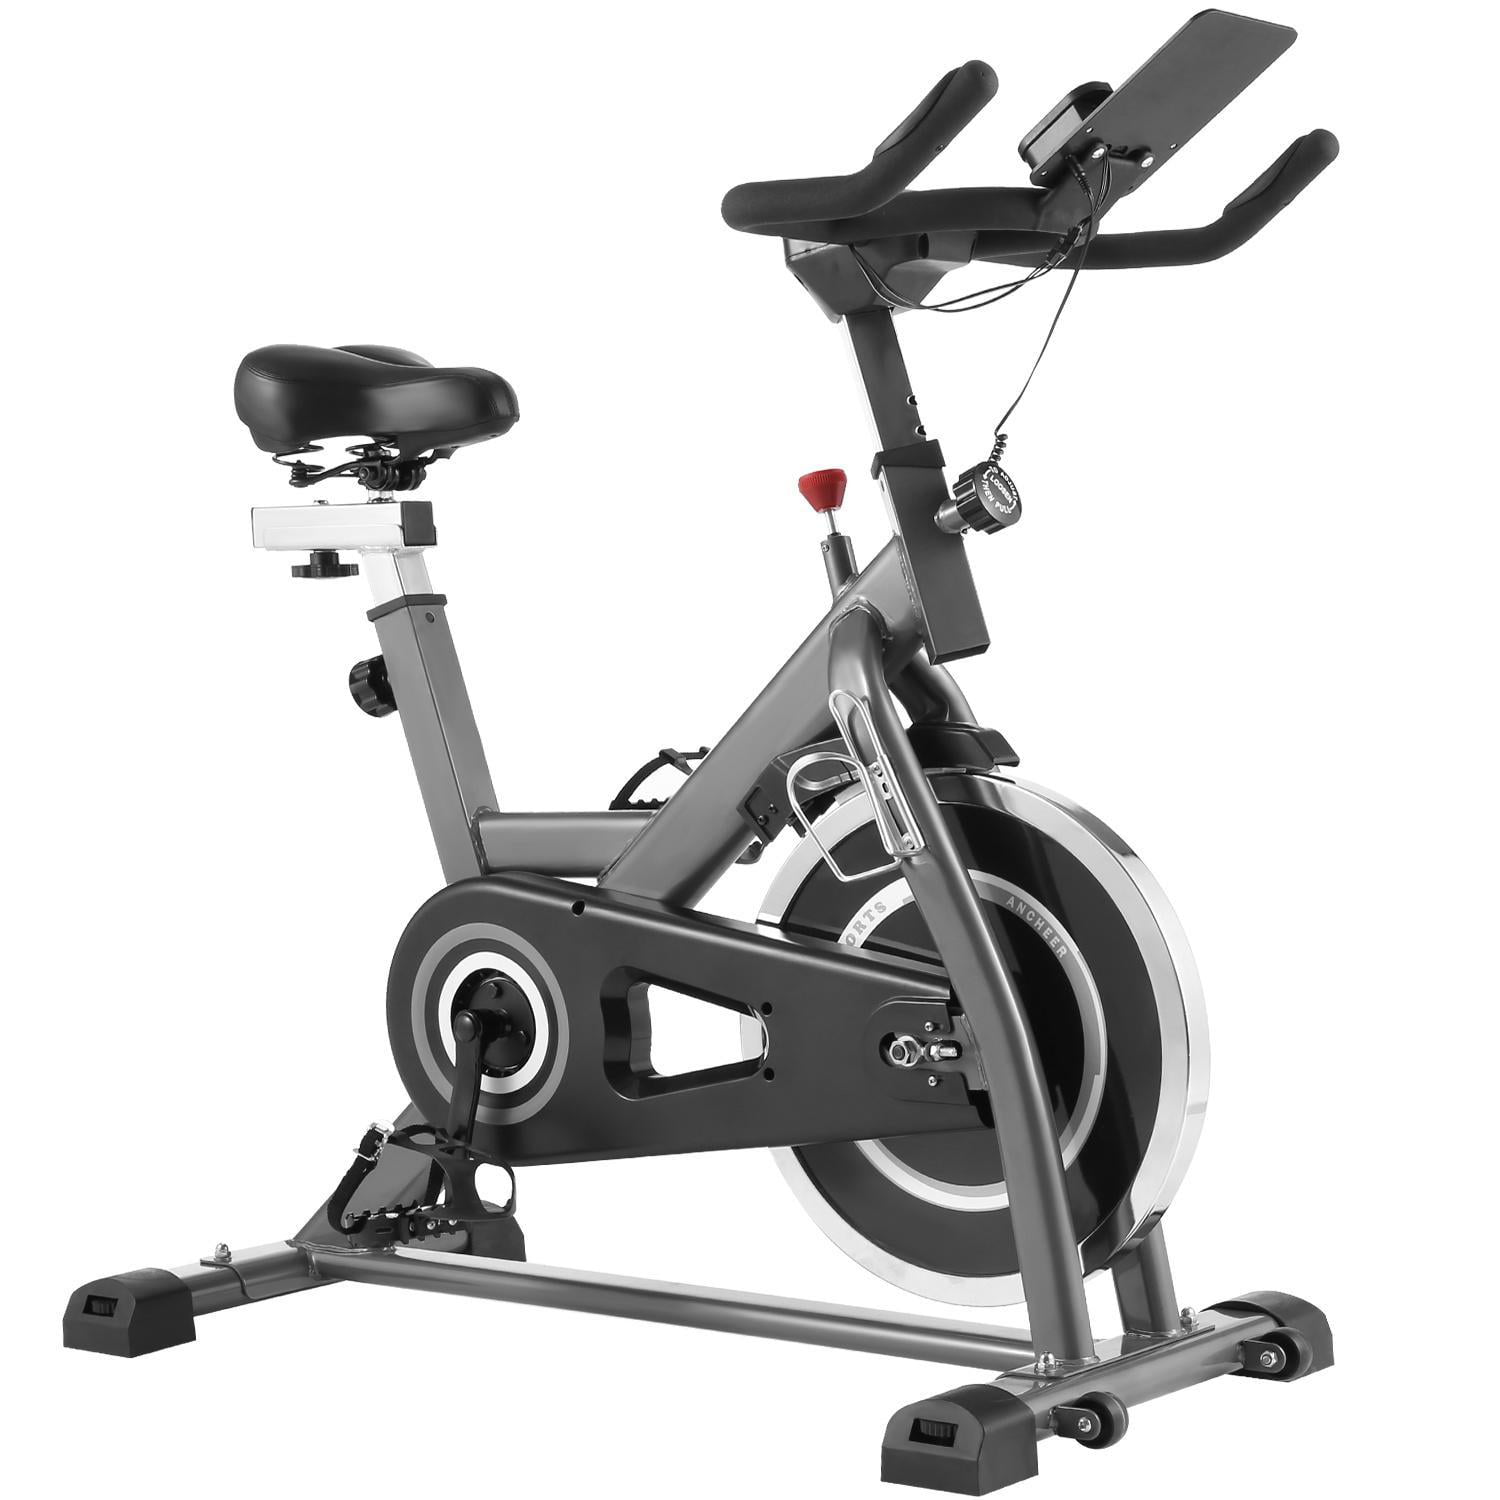 Details about   Home Exercise Bike Cardio Indoor Cycling Home Fitness Stationary Equipment 